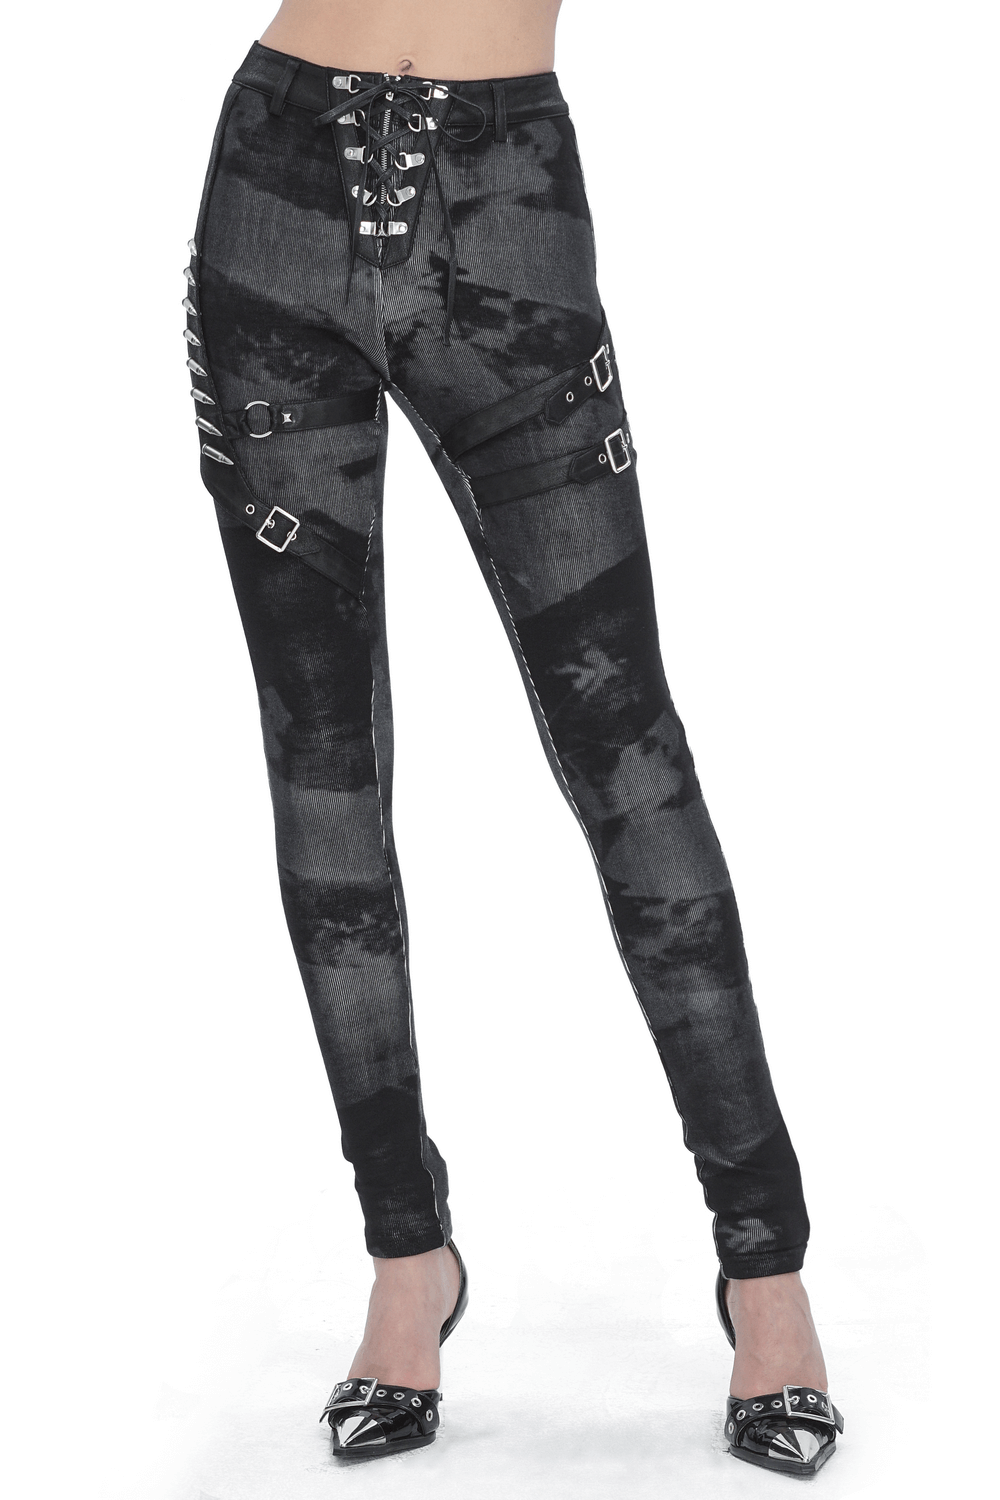 Gothic High-Waist Lace-Up Pants with Buckles and Straps